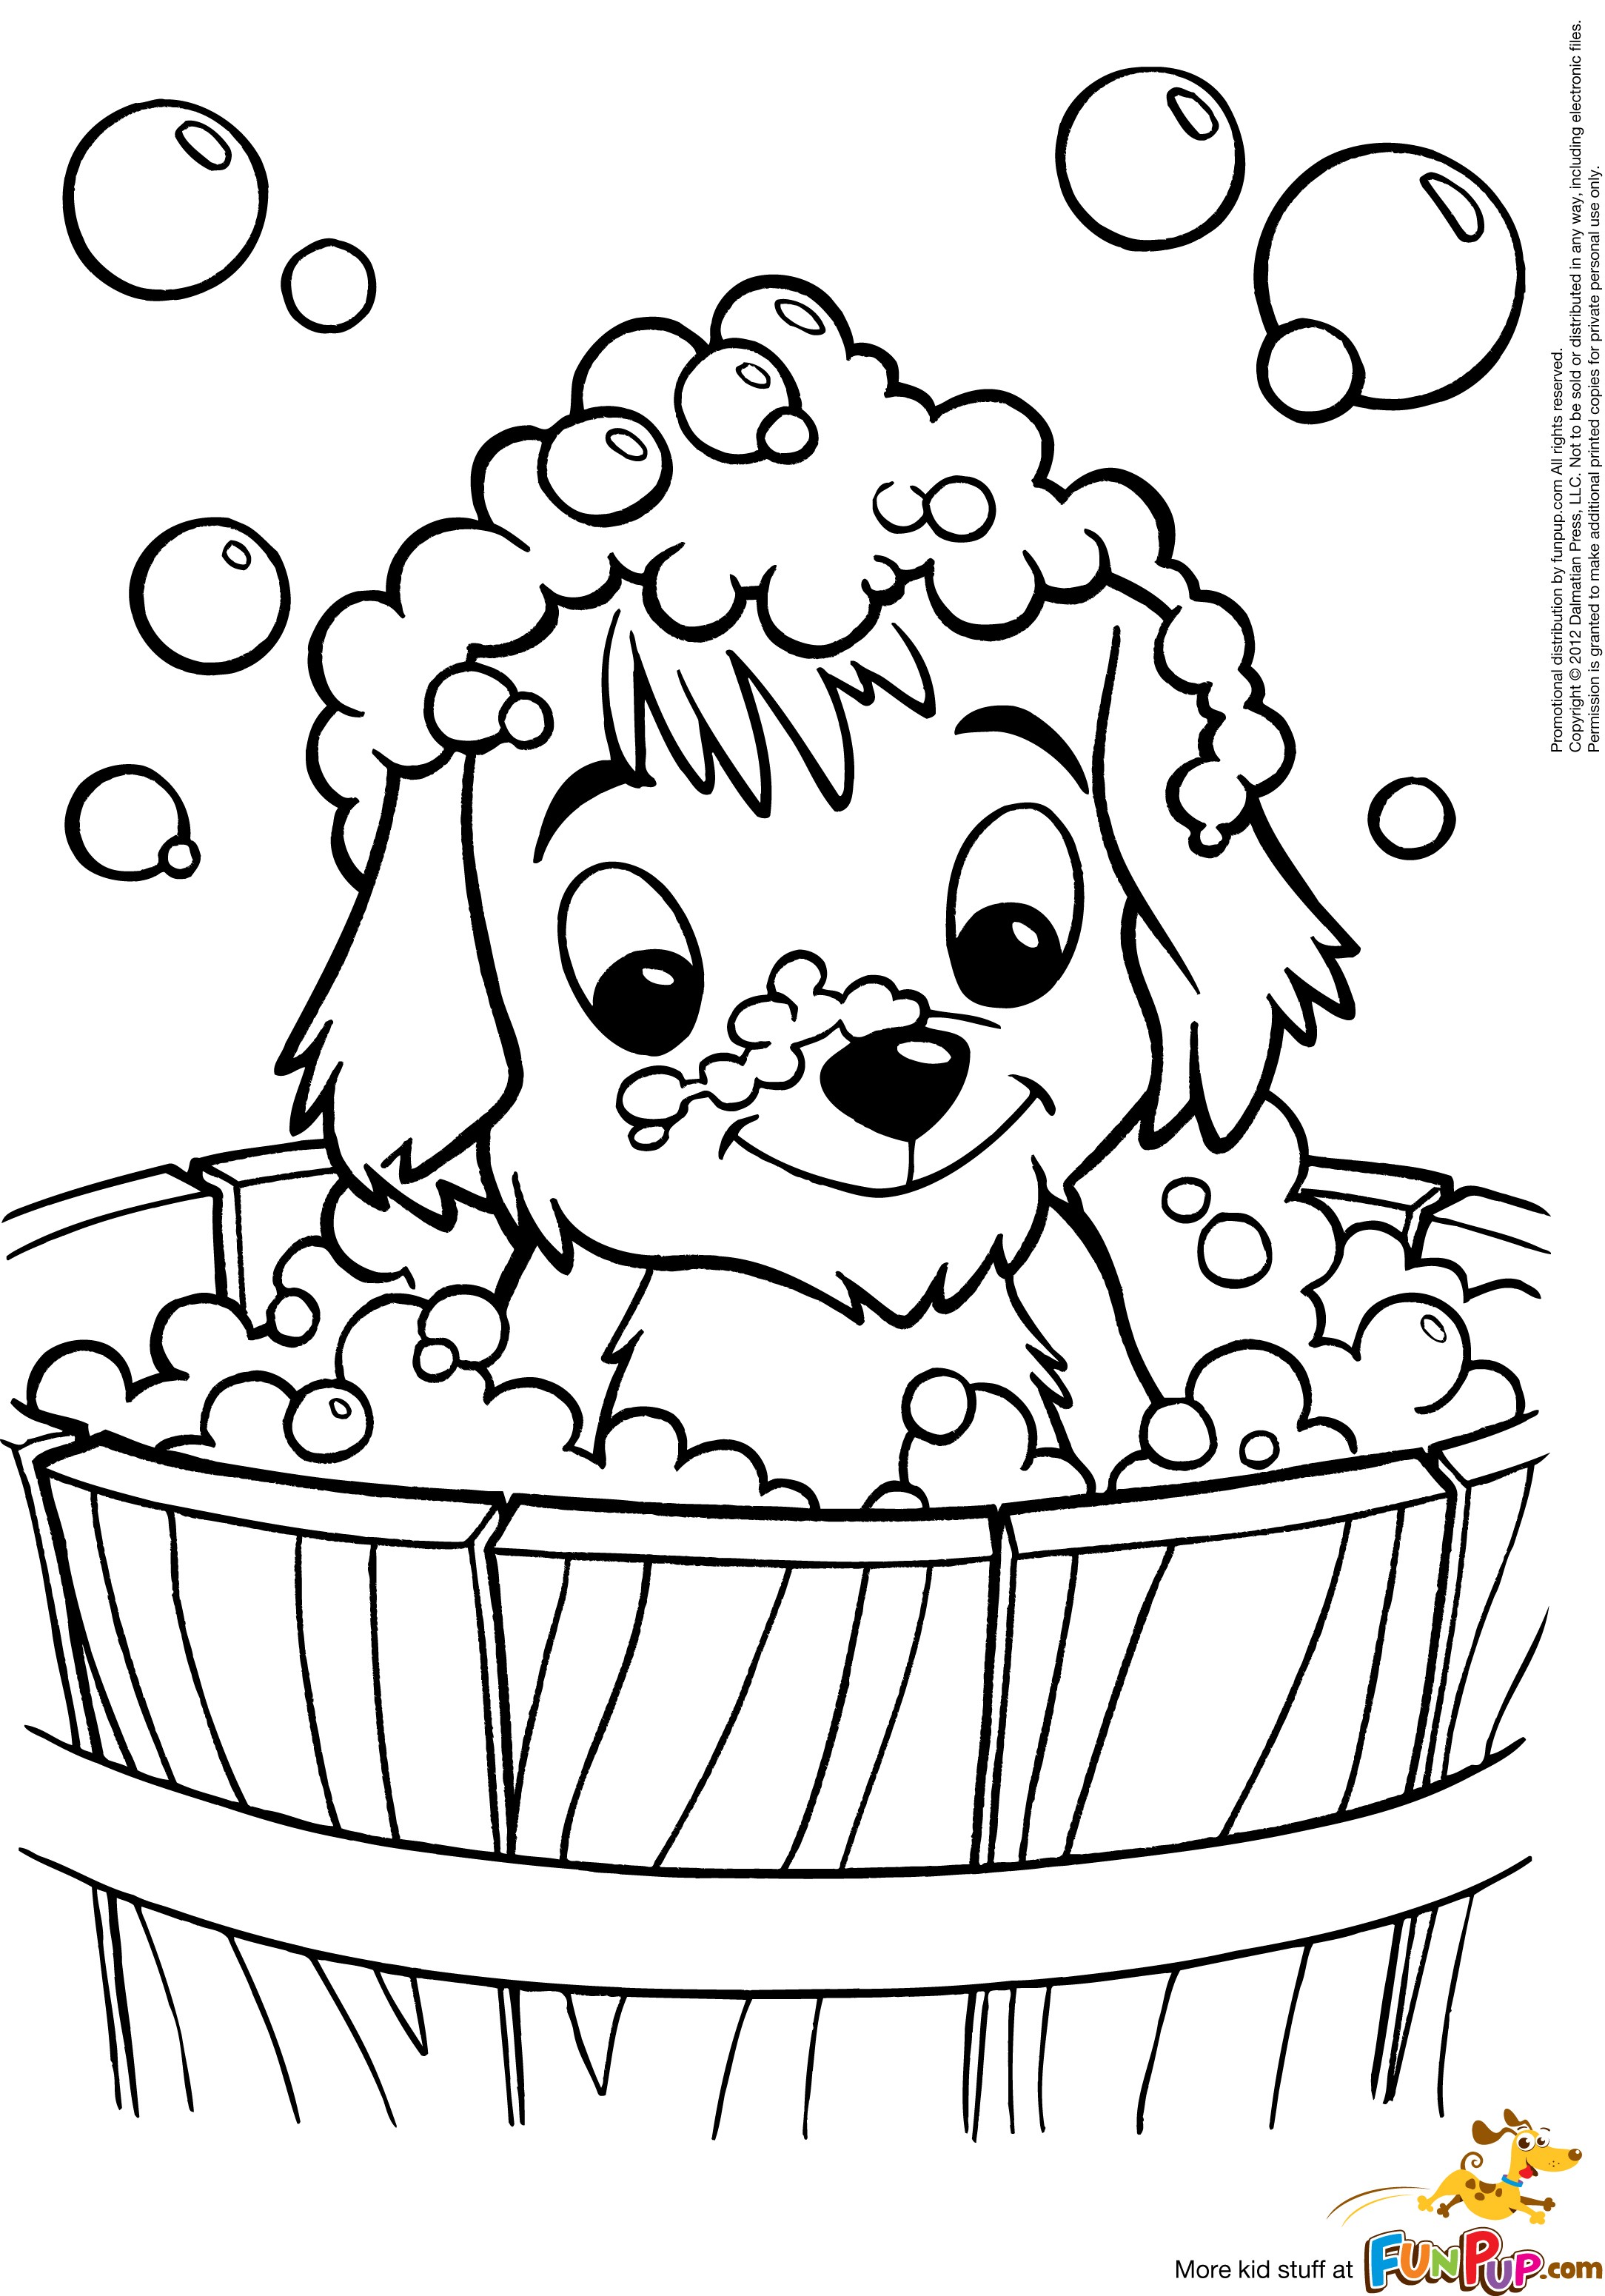 print-download-draw-your-own-puppy-coloring-pages-cute-puppy